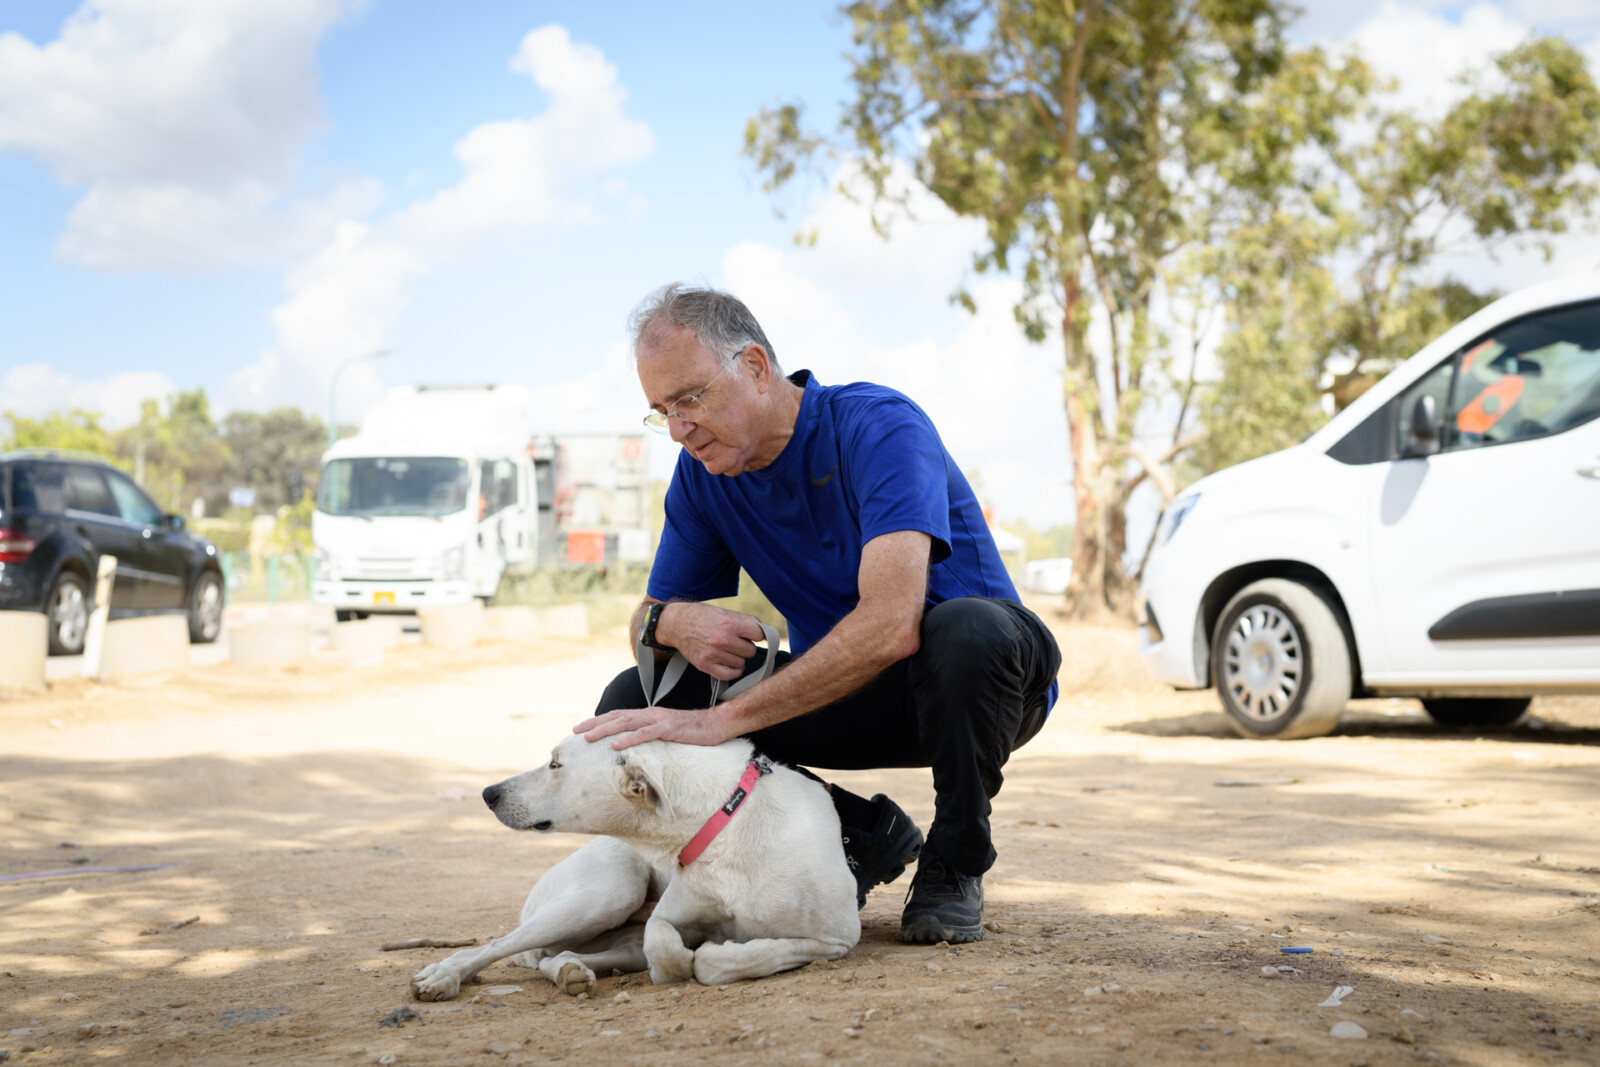 Lt. Col. Uri Ariel at Beit Kama. “They gave me a dog they found and I found a family for it” (Photo: Yonatan Bloom).